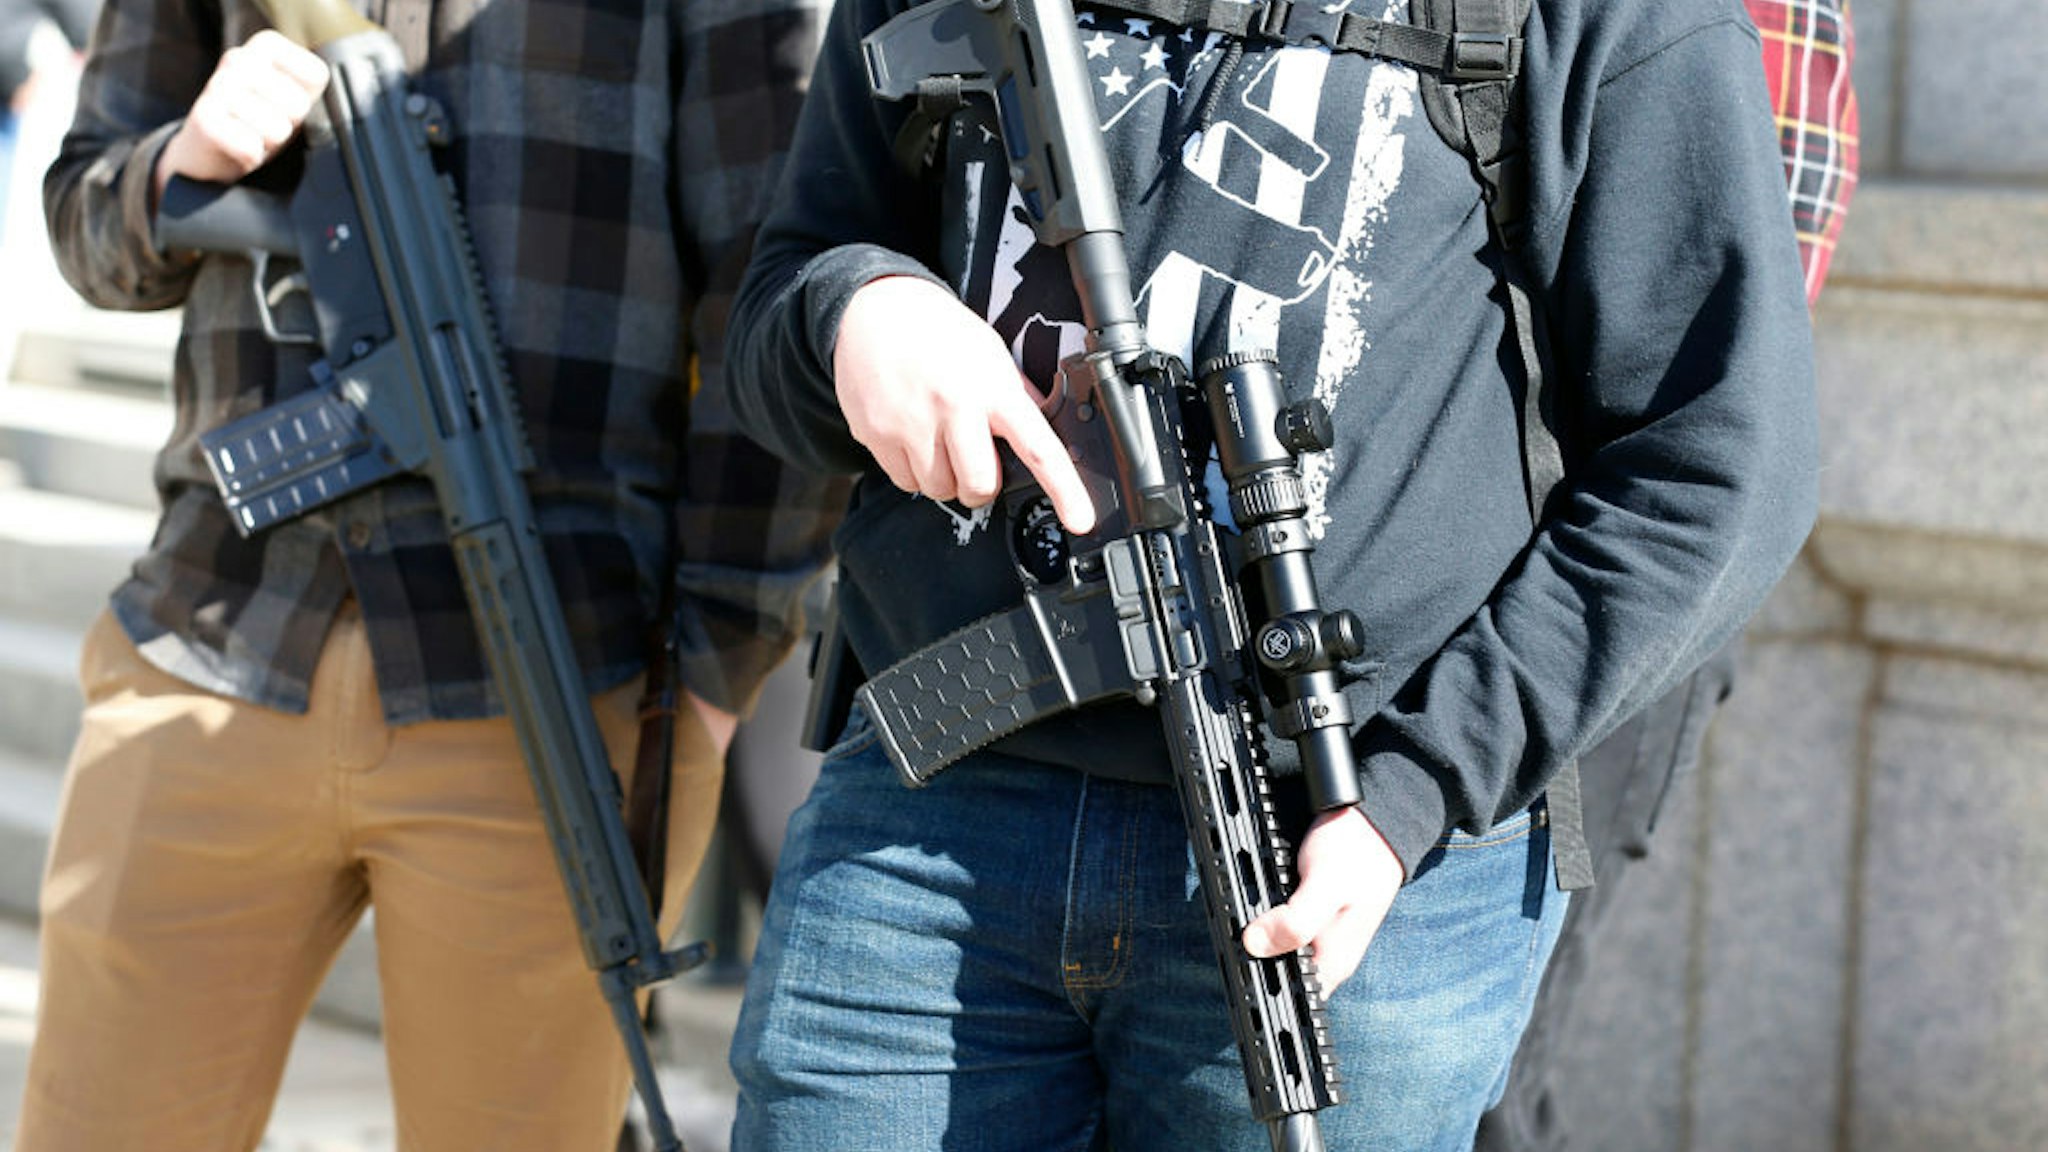 Two men with their firearms listen to speakers at a protest to new gun legislation at the Utah State Capitol in Salt Lake City, Utah on February 8, 2020. - The protestors are opposing new gun legislation that they say will restrict their US second amendment rights. Utah is an open carry state.